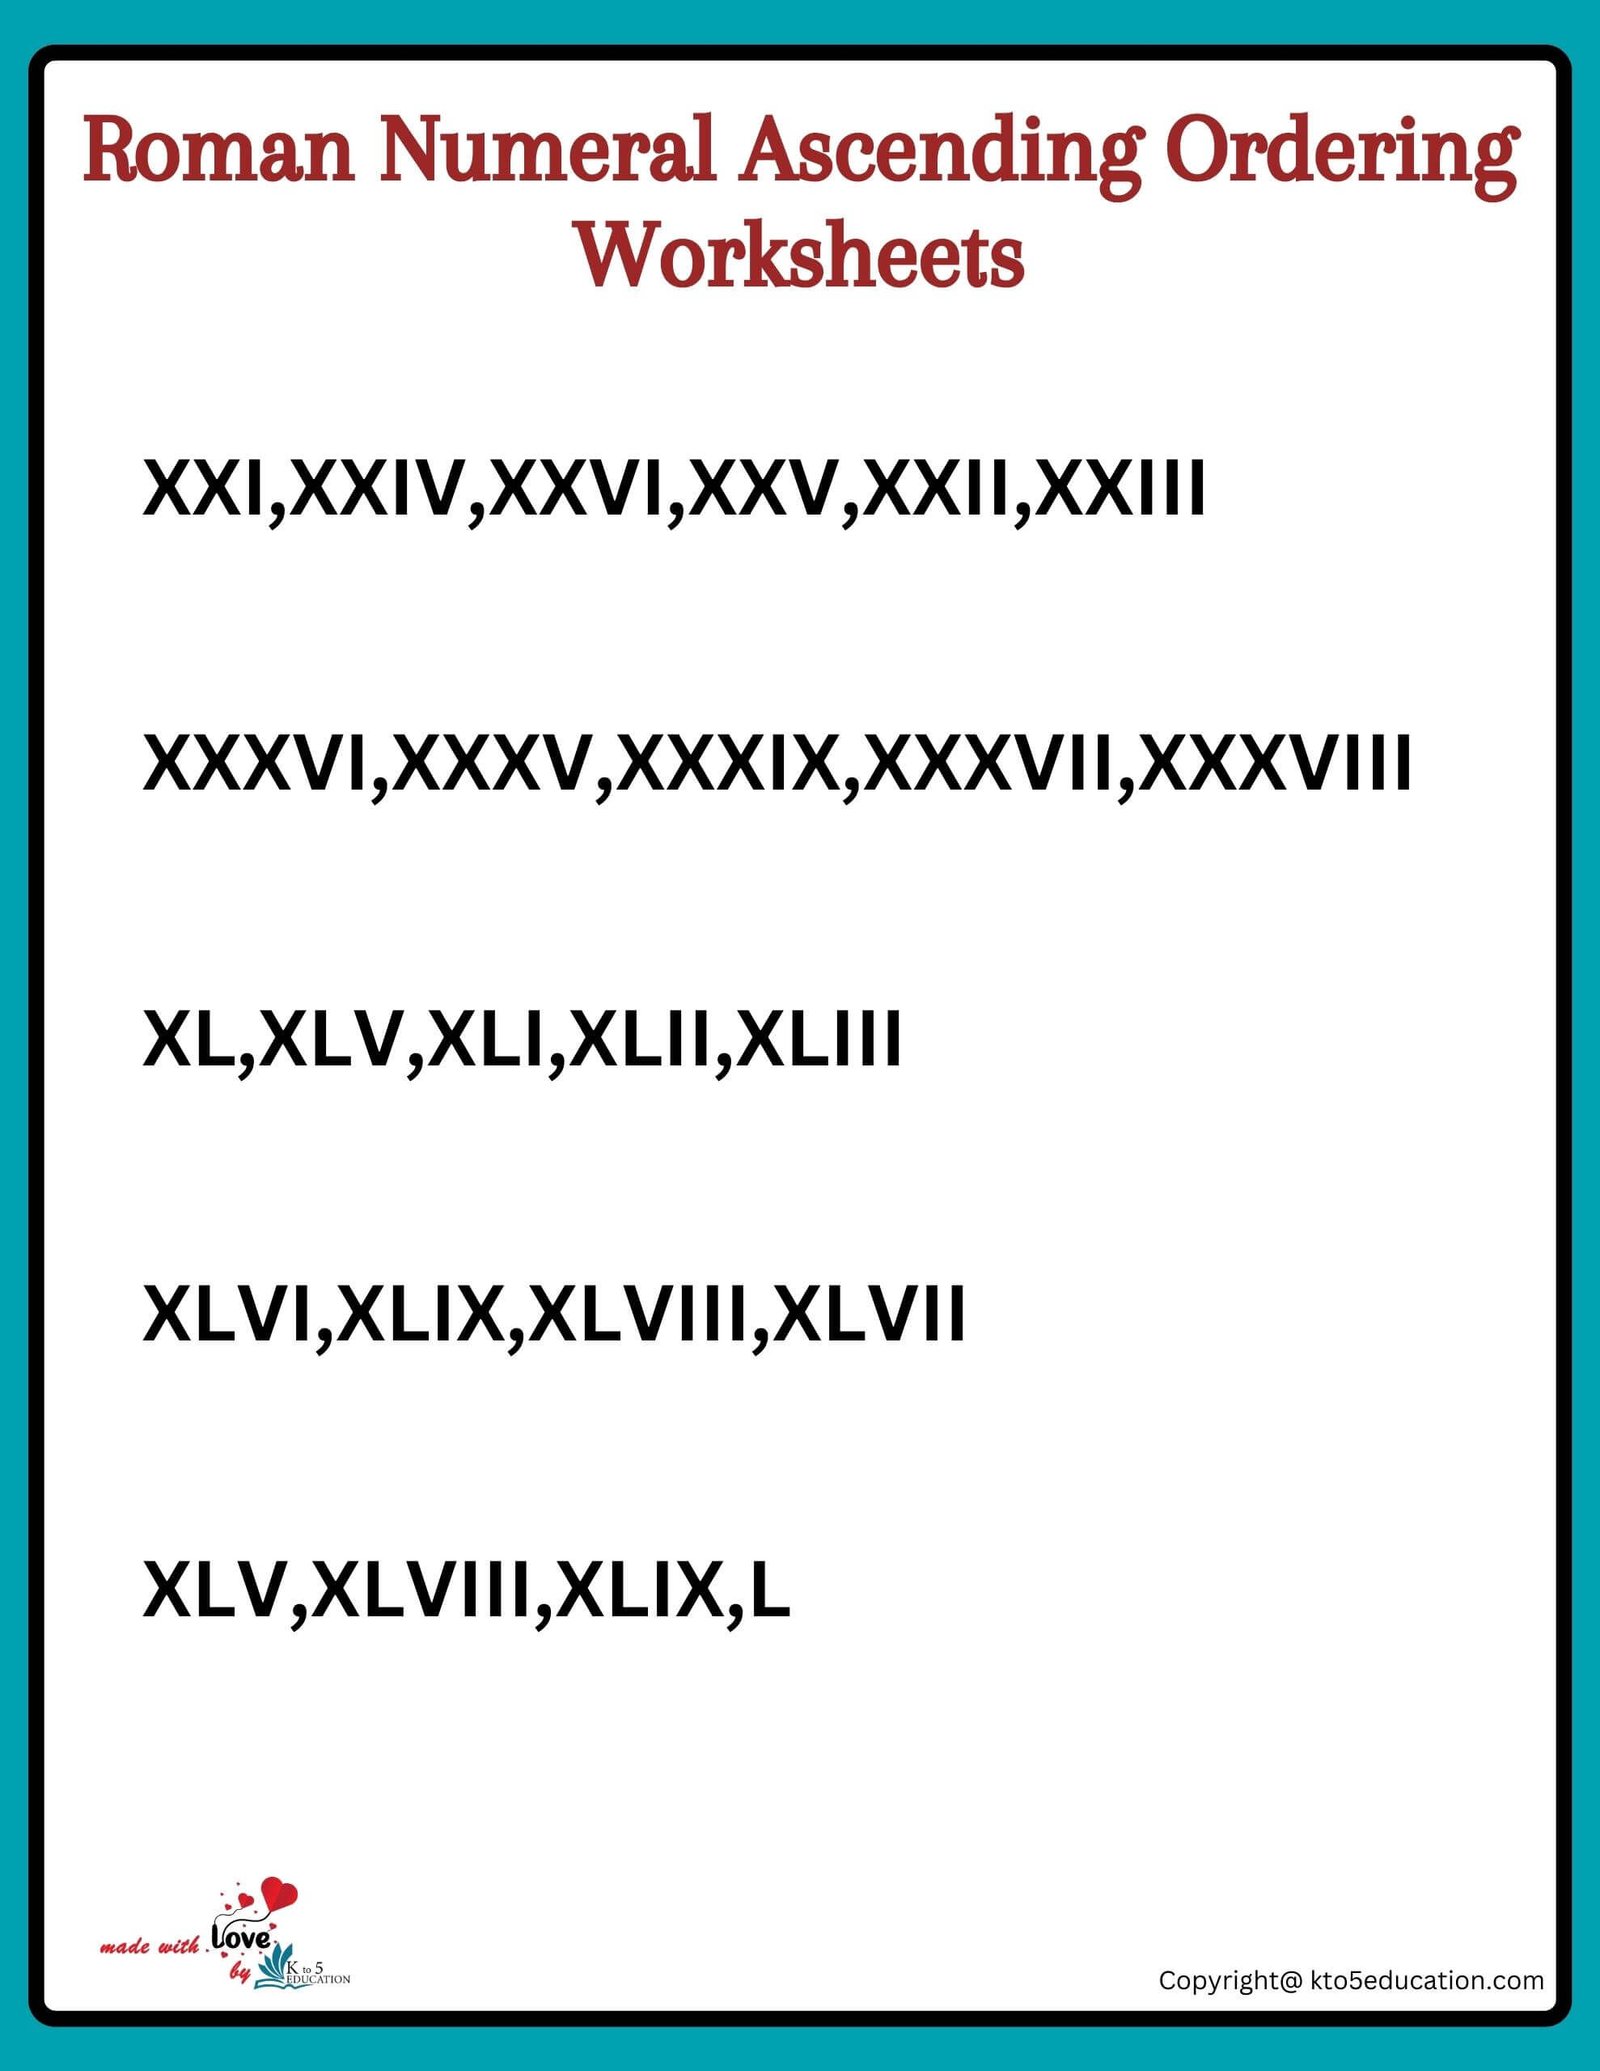 Roman Numeral Number Ascending Ordering Worksheets 1 TO 50